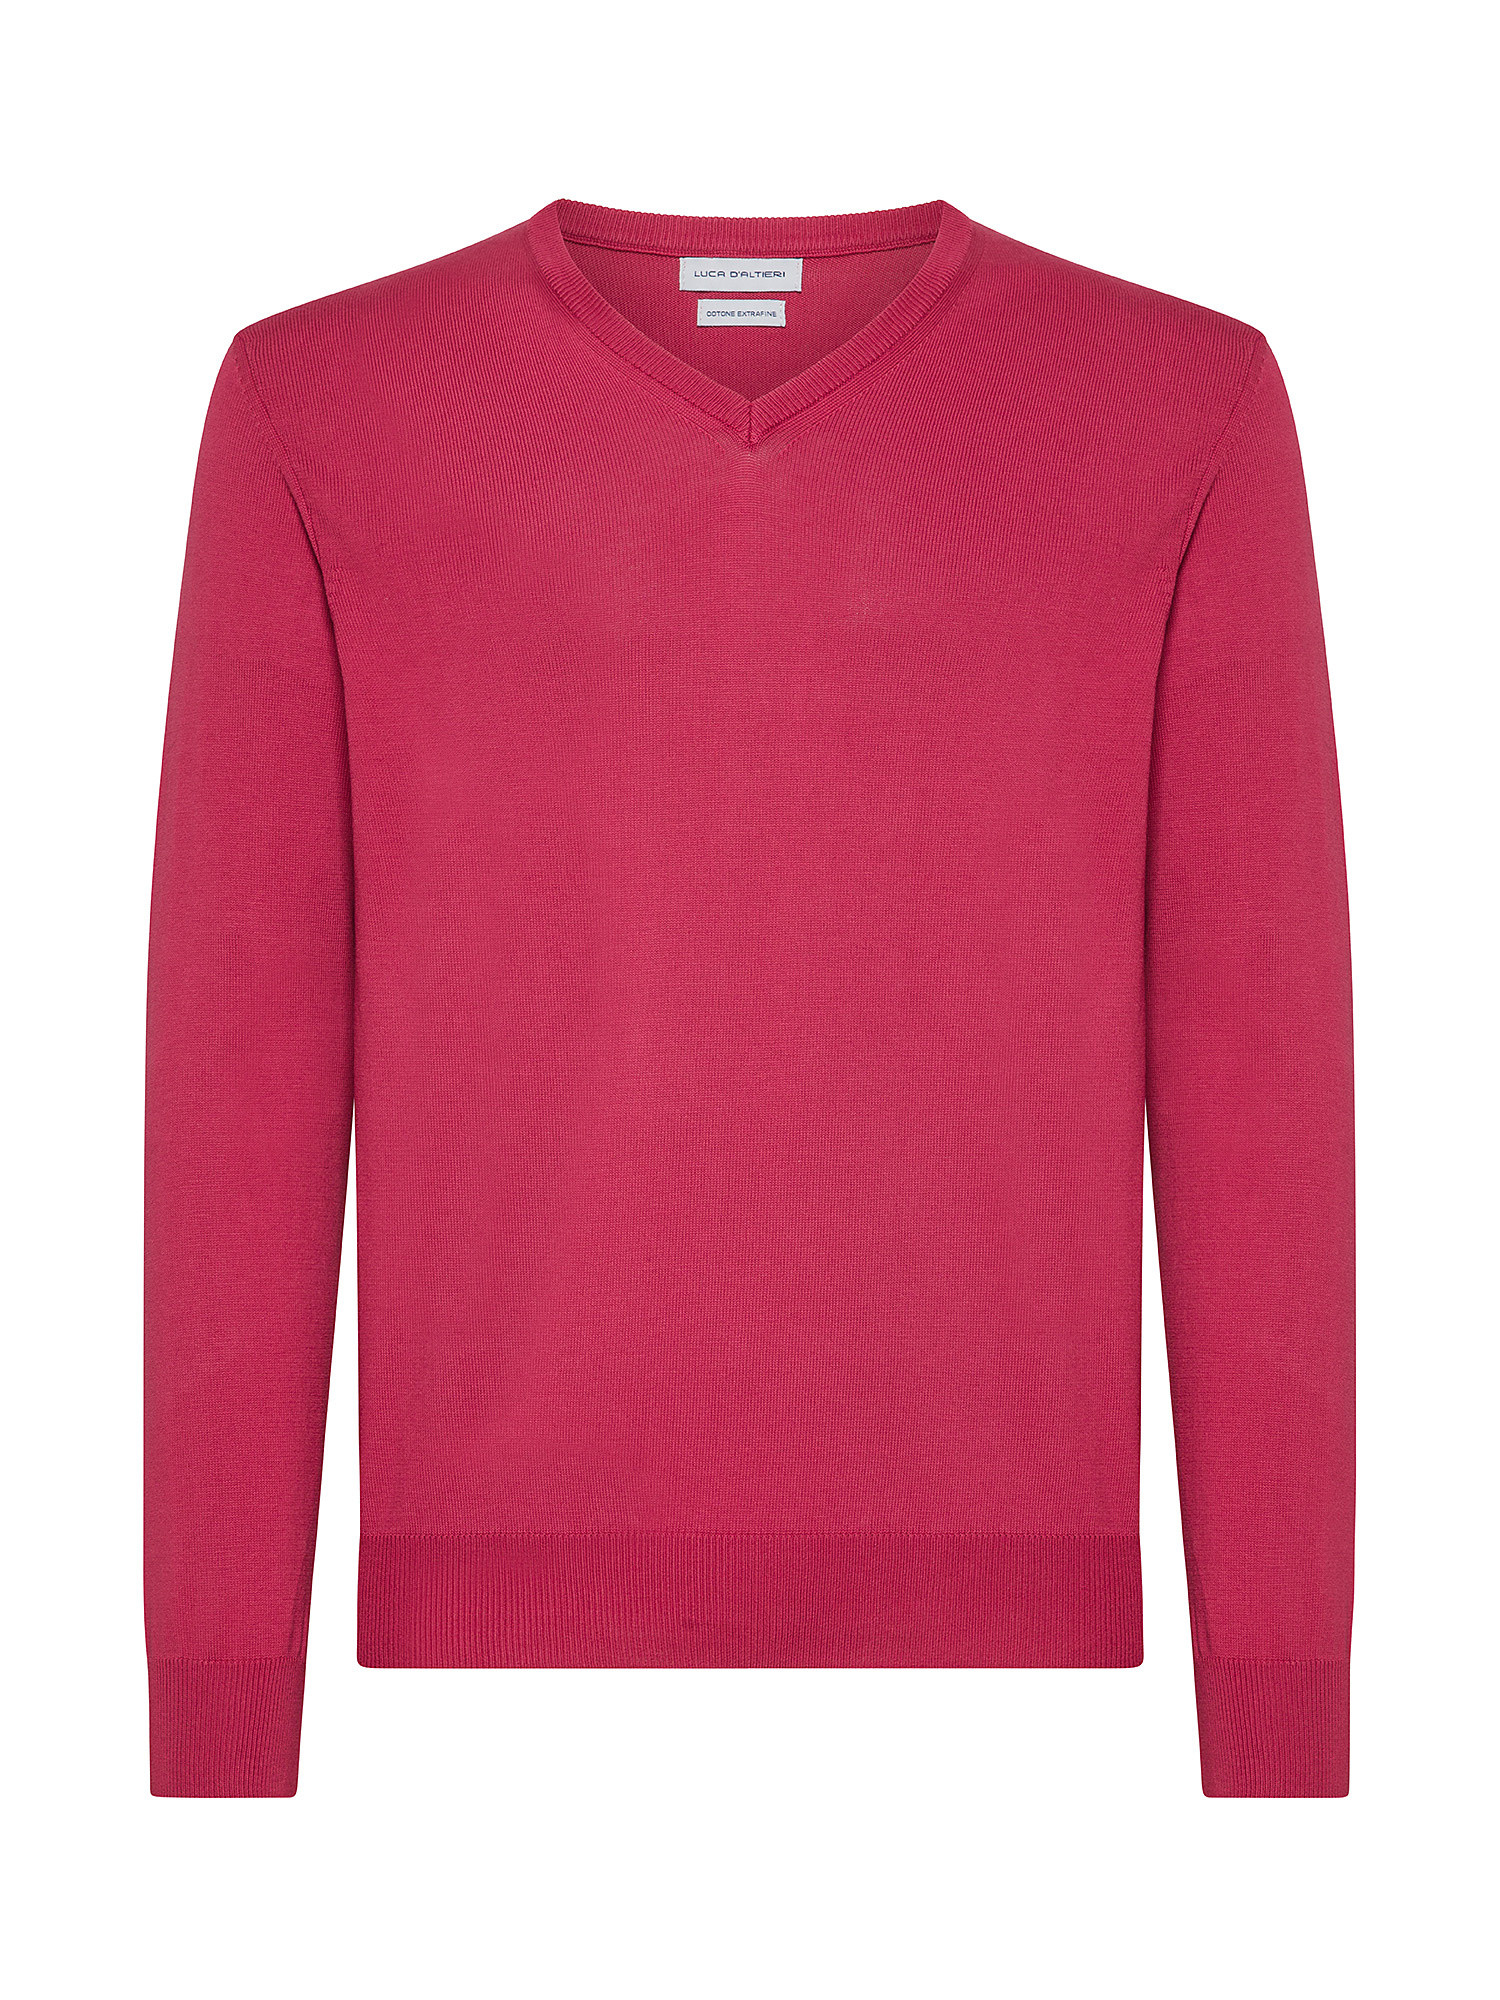 Luca D'Altieri - V-neck pullover in extrafine pure cotton, Pink Fuchsia, large image number 0